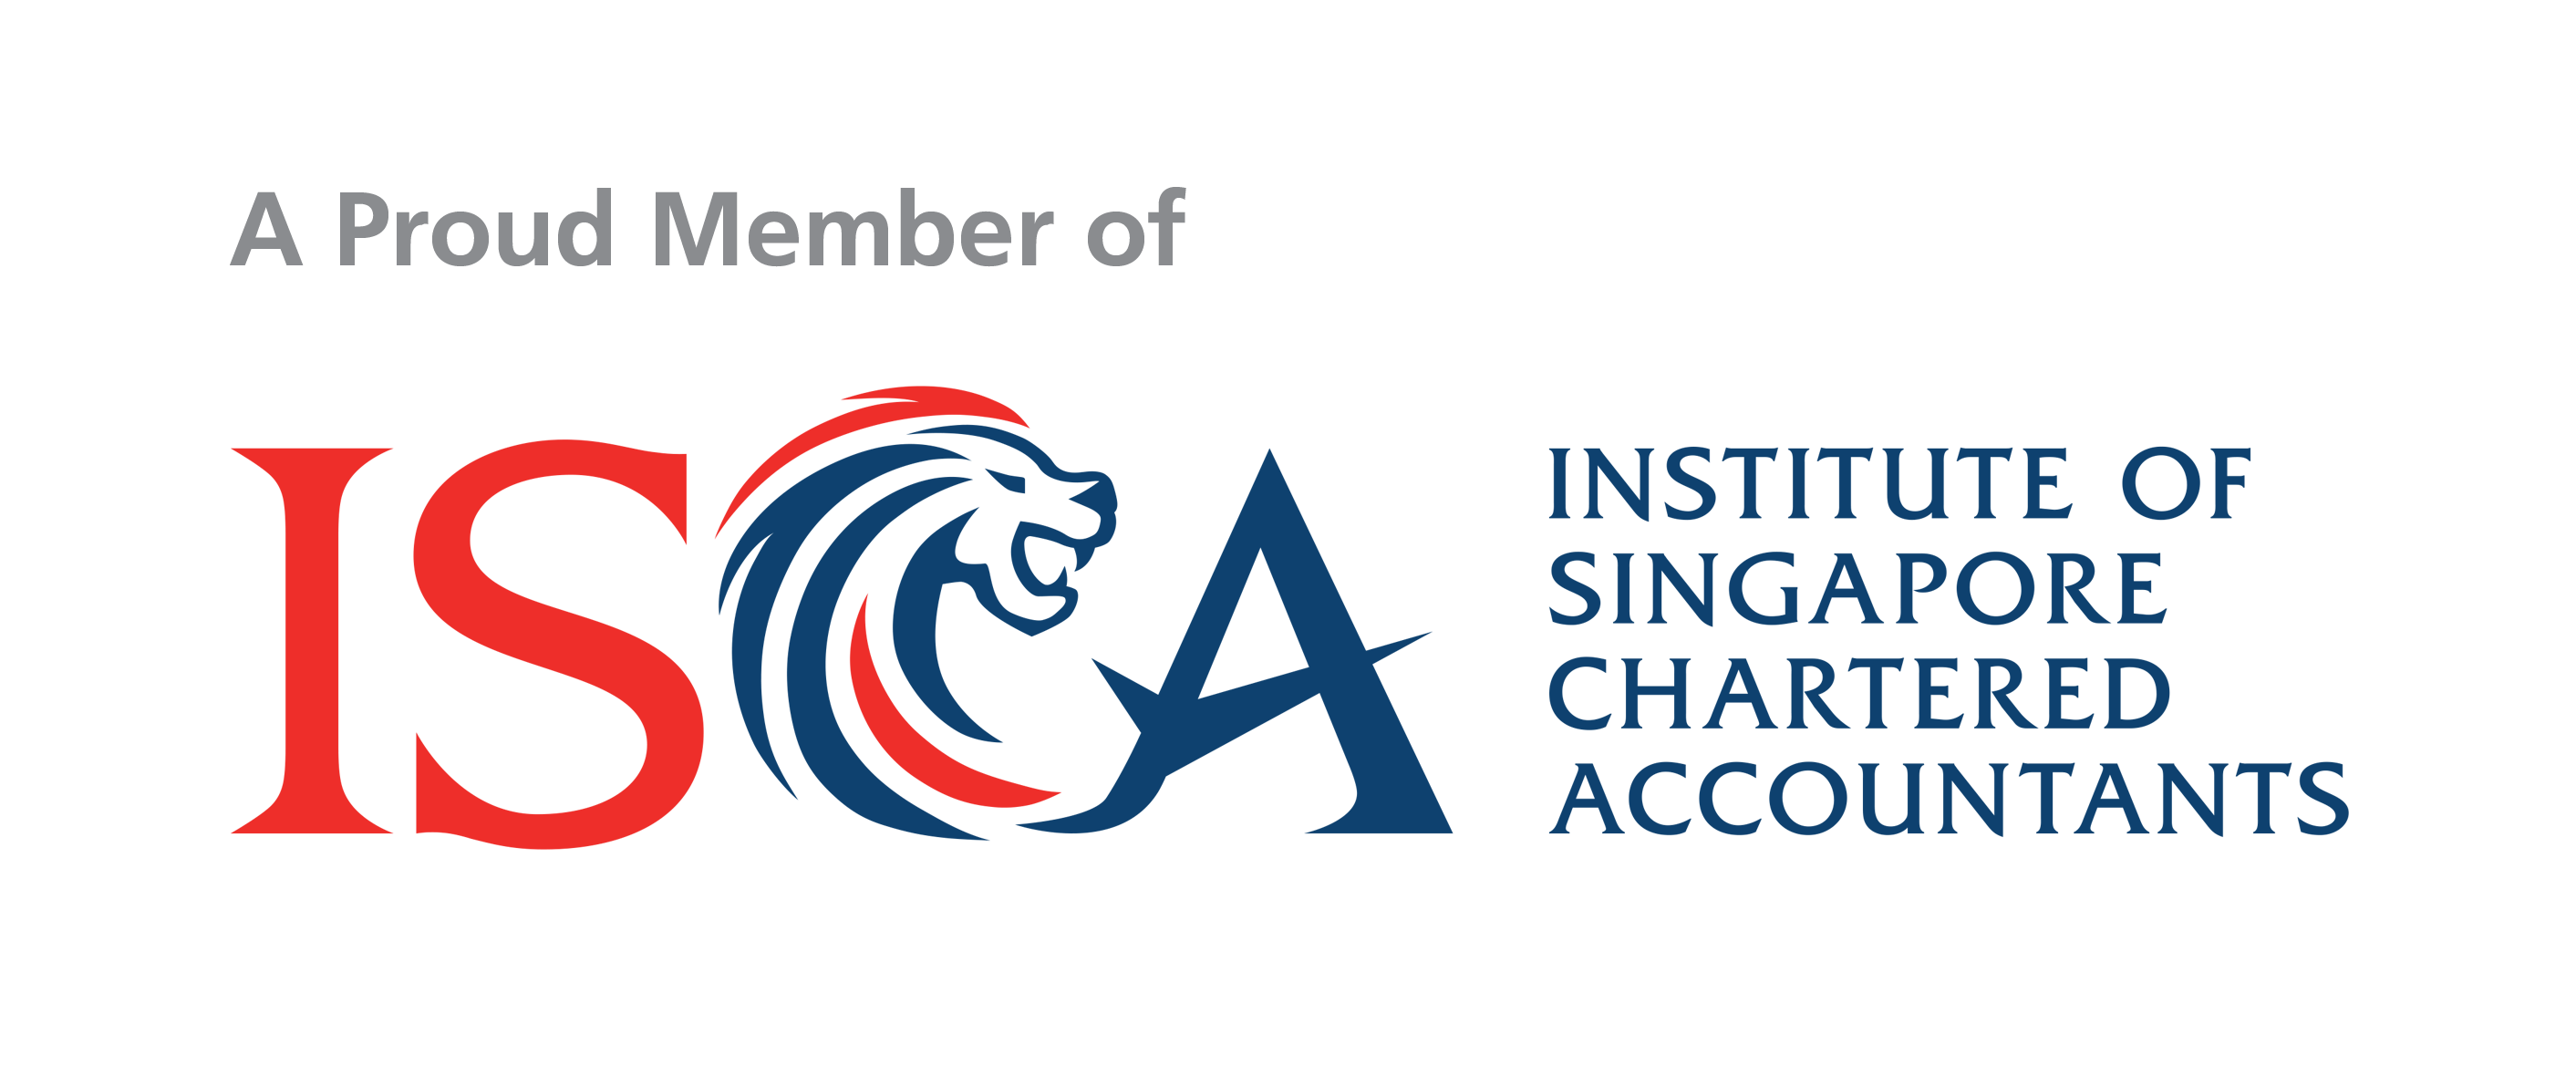 Entrust is a Member of ISCA